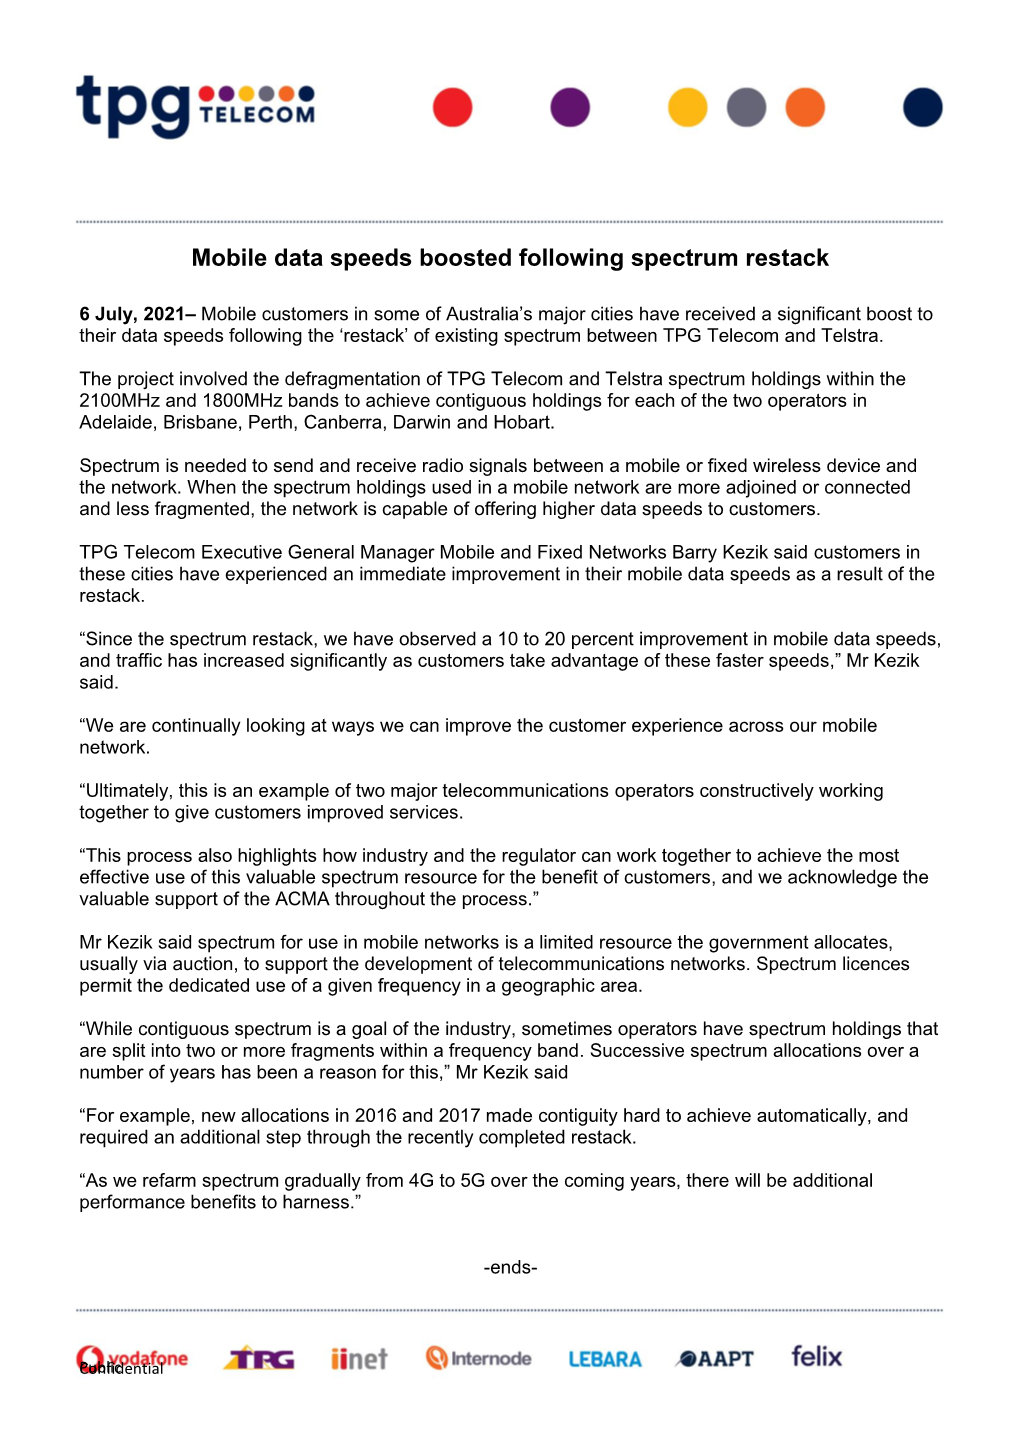 Mobile Data Speeds Boosted Following Spectrum Restack